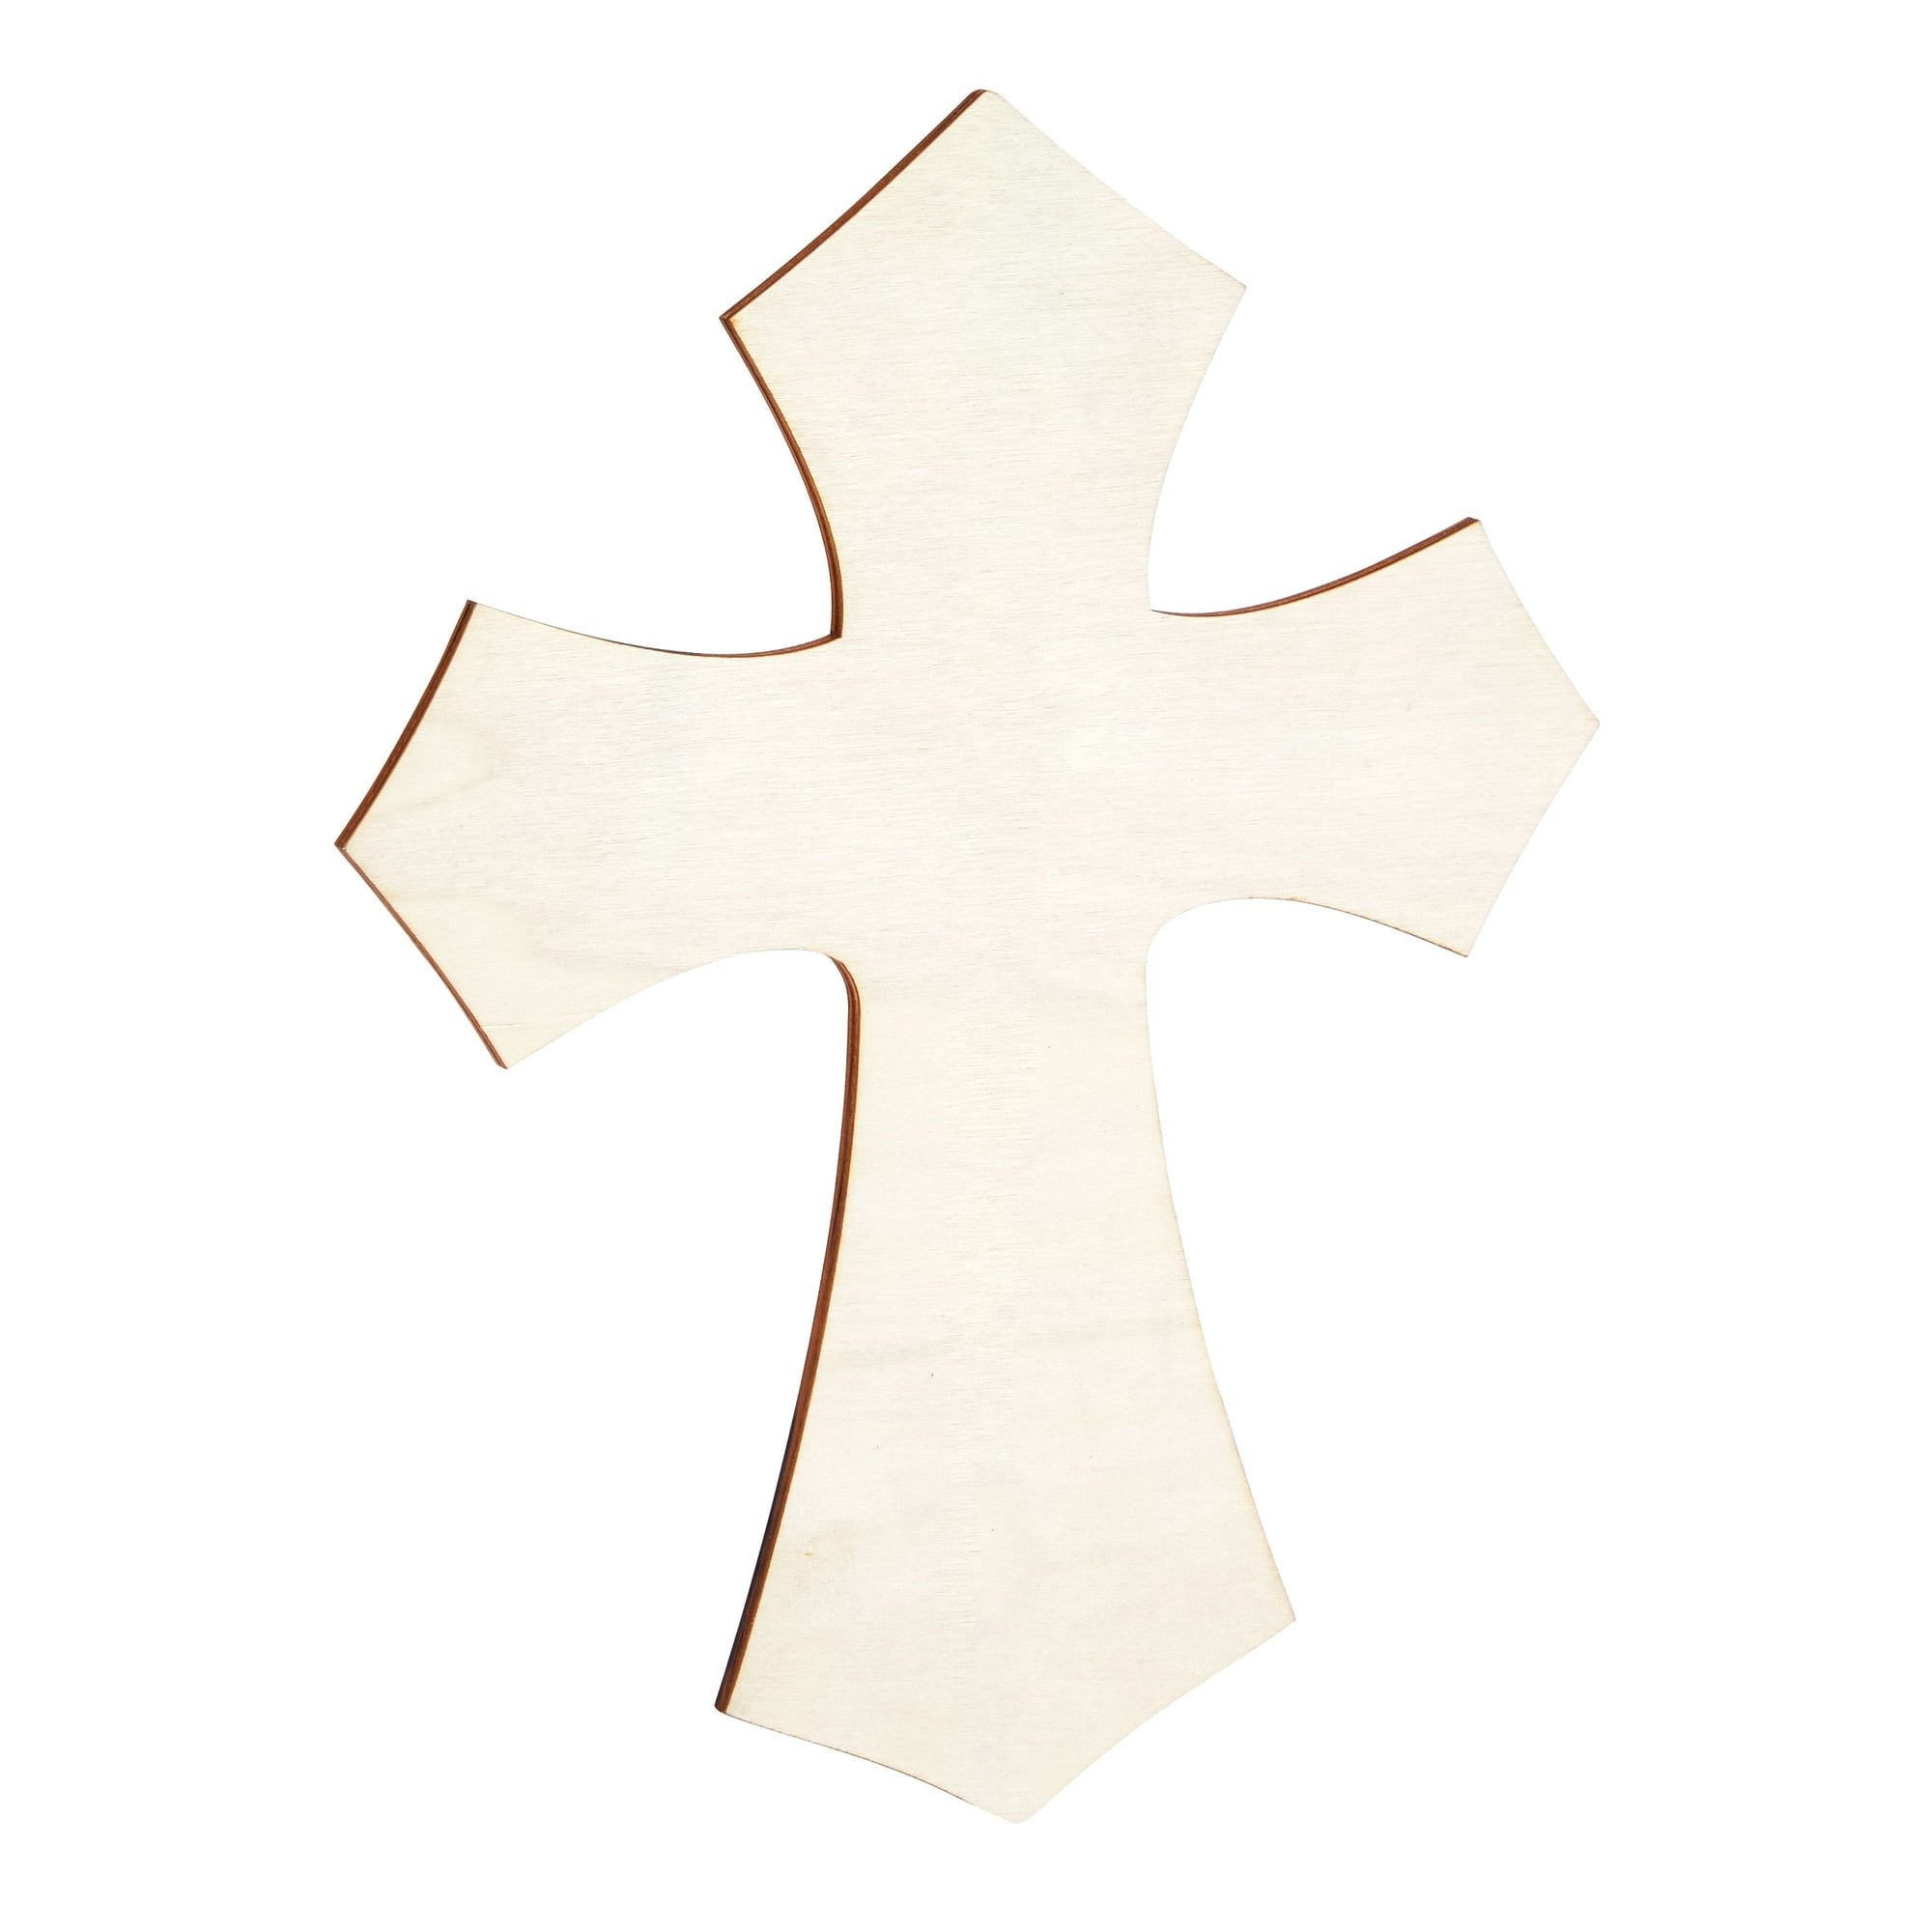 Unfinished Wood Cutout - 100-Pack Classic Cross Shaped Wood Pieces